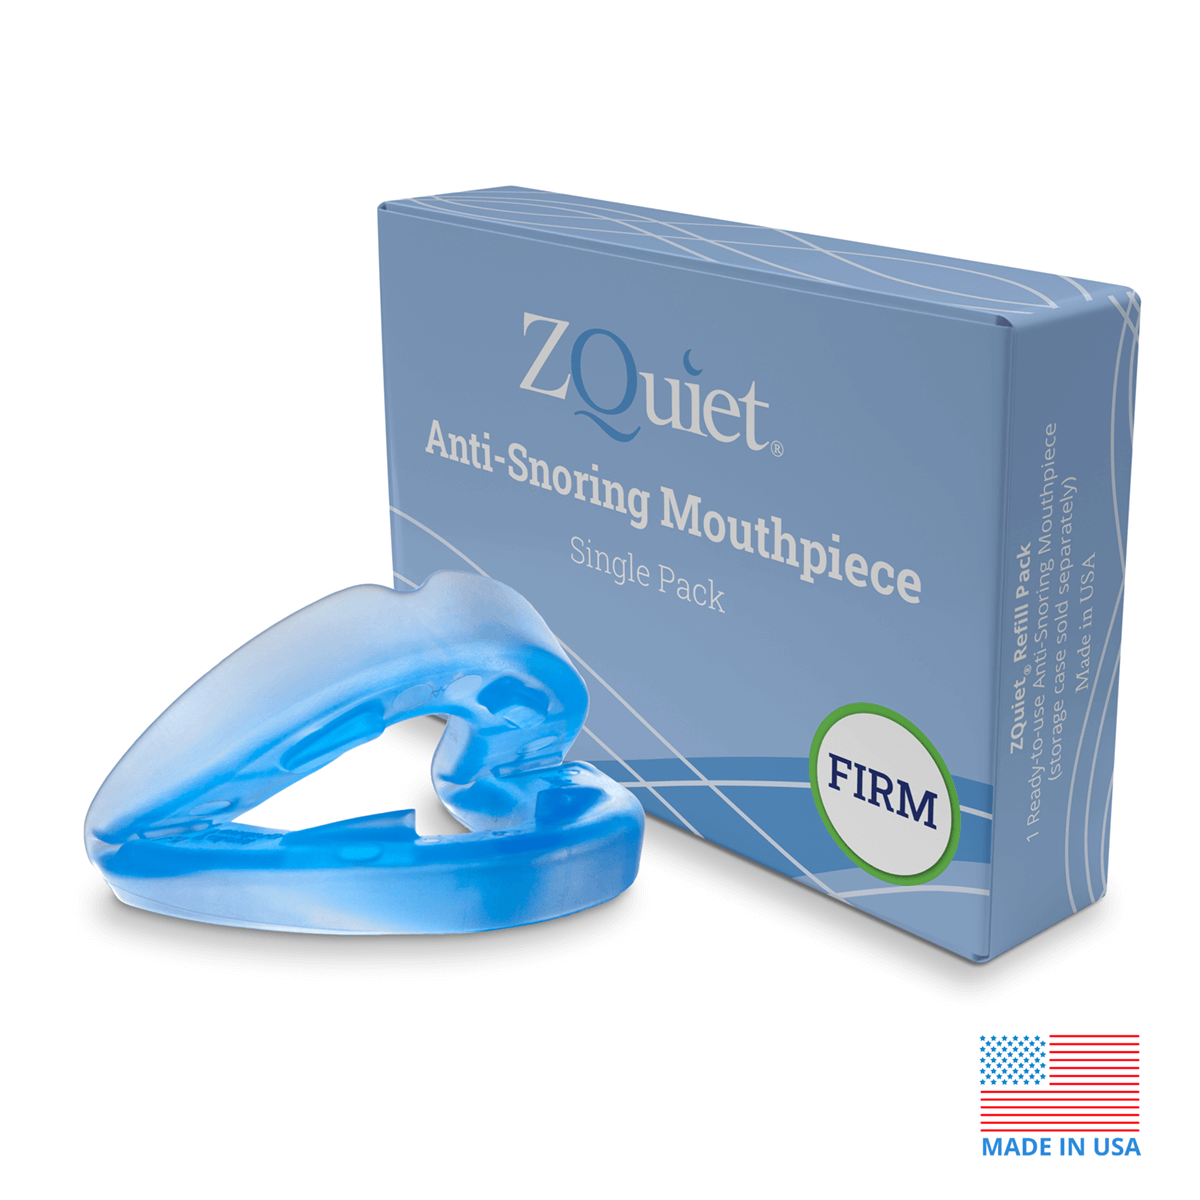 ZQuiet anti snoring mouthpiece firm single pack product image